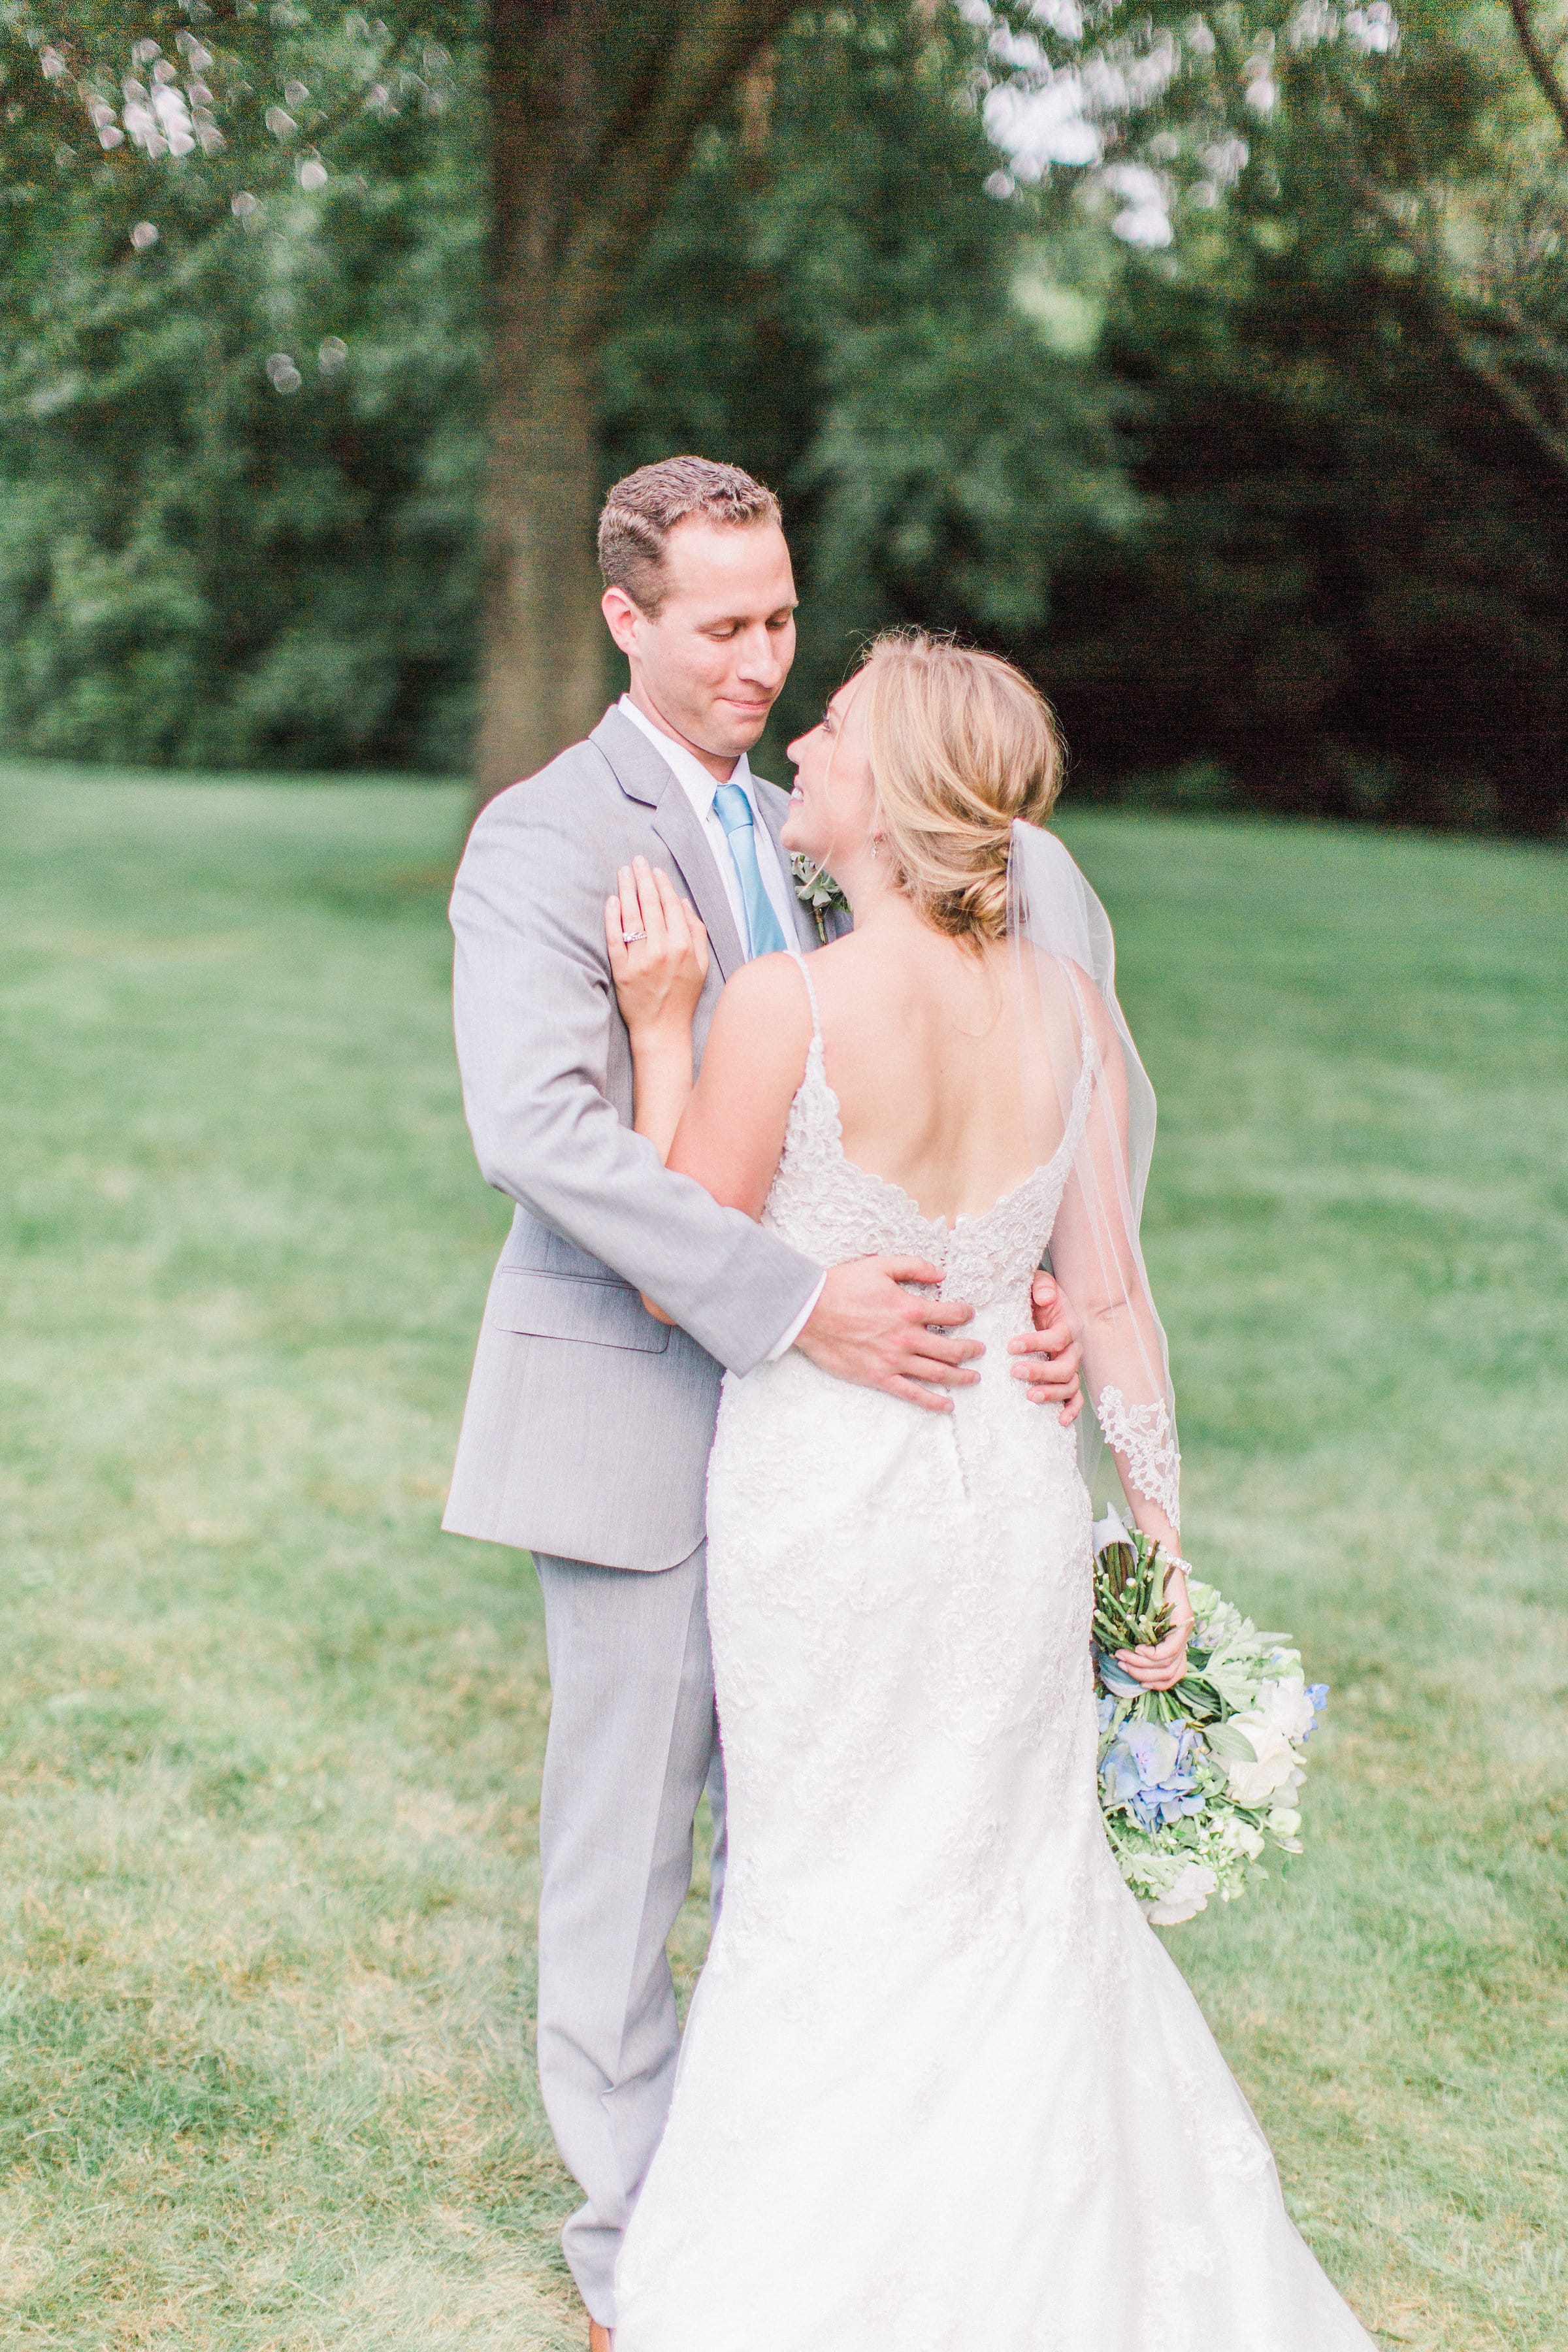 Real wedding Featuring Rebecca Ingram bride wearing Drew. This #rebeccabride had both parents walk her down the aisle!